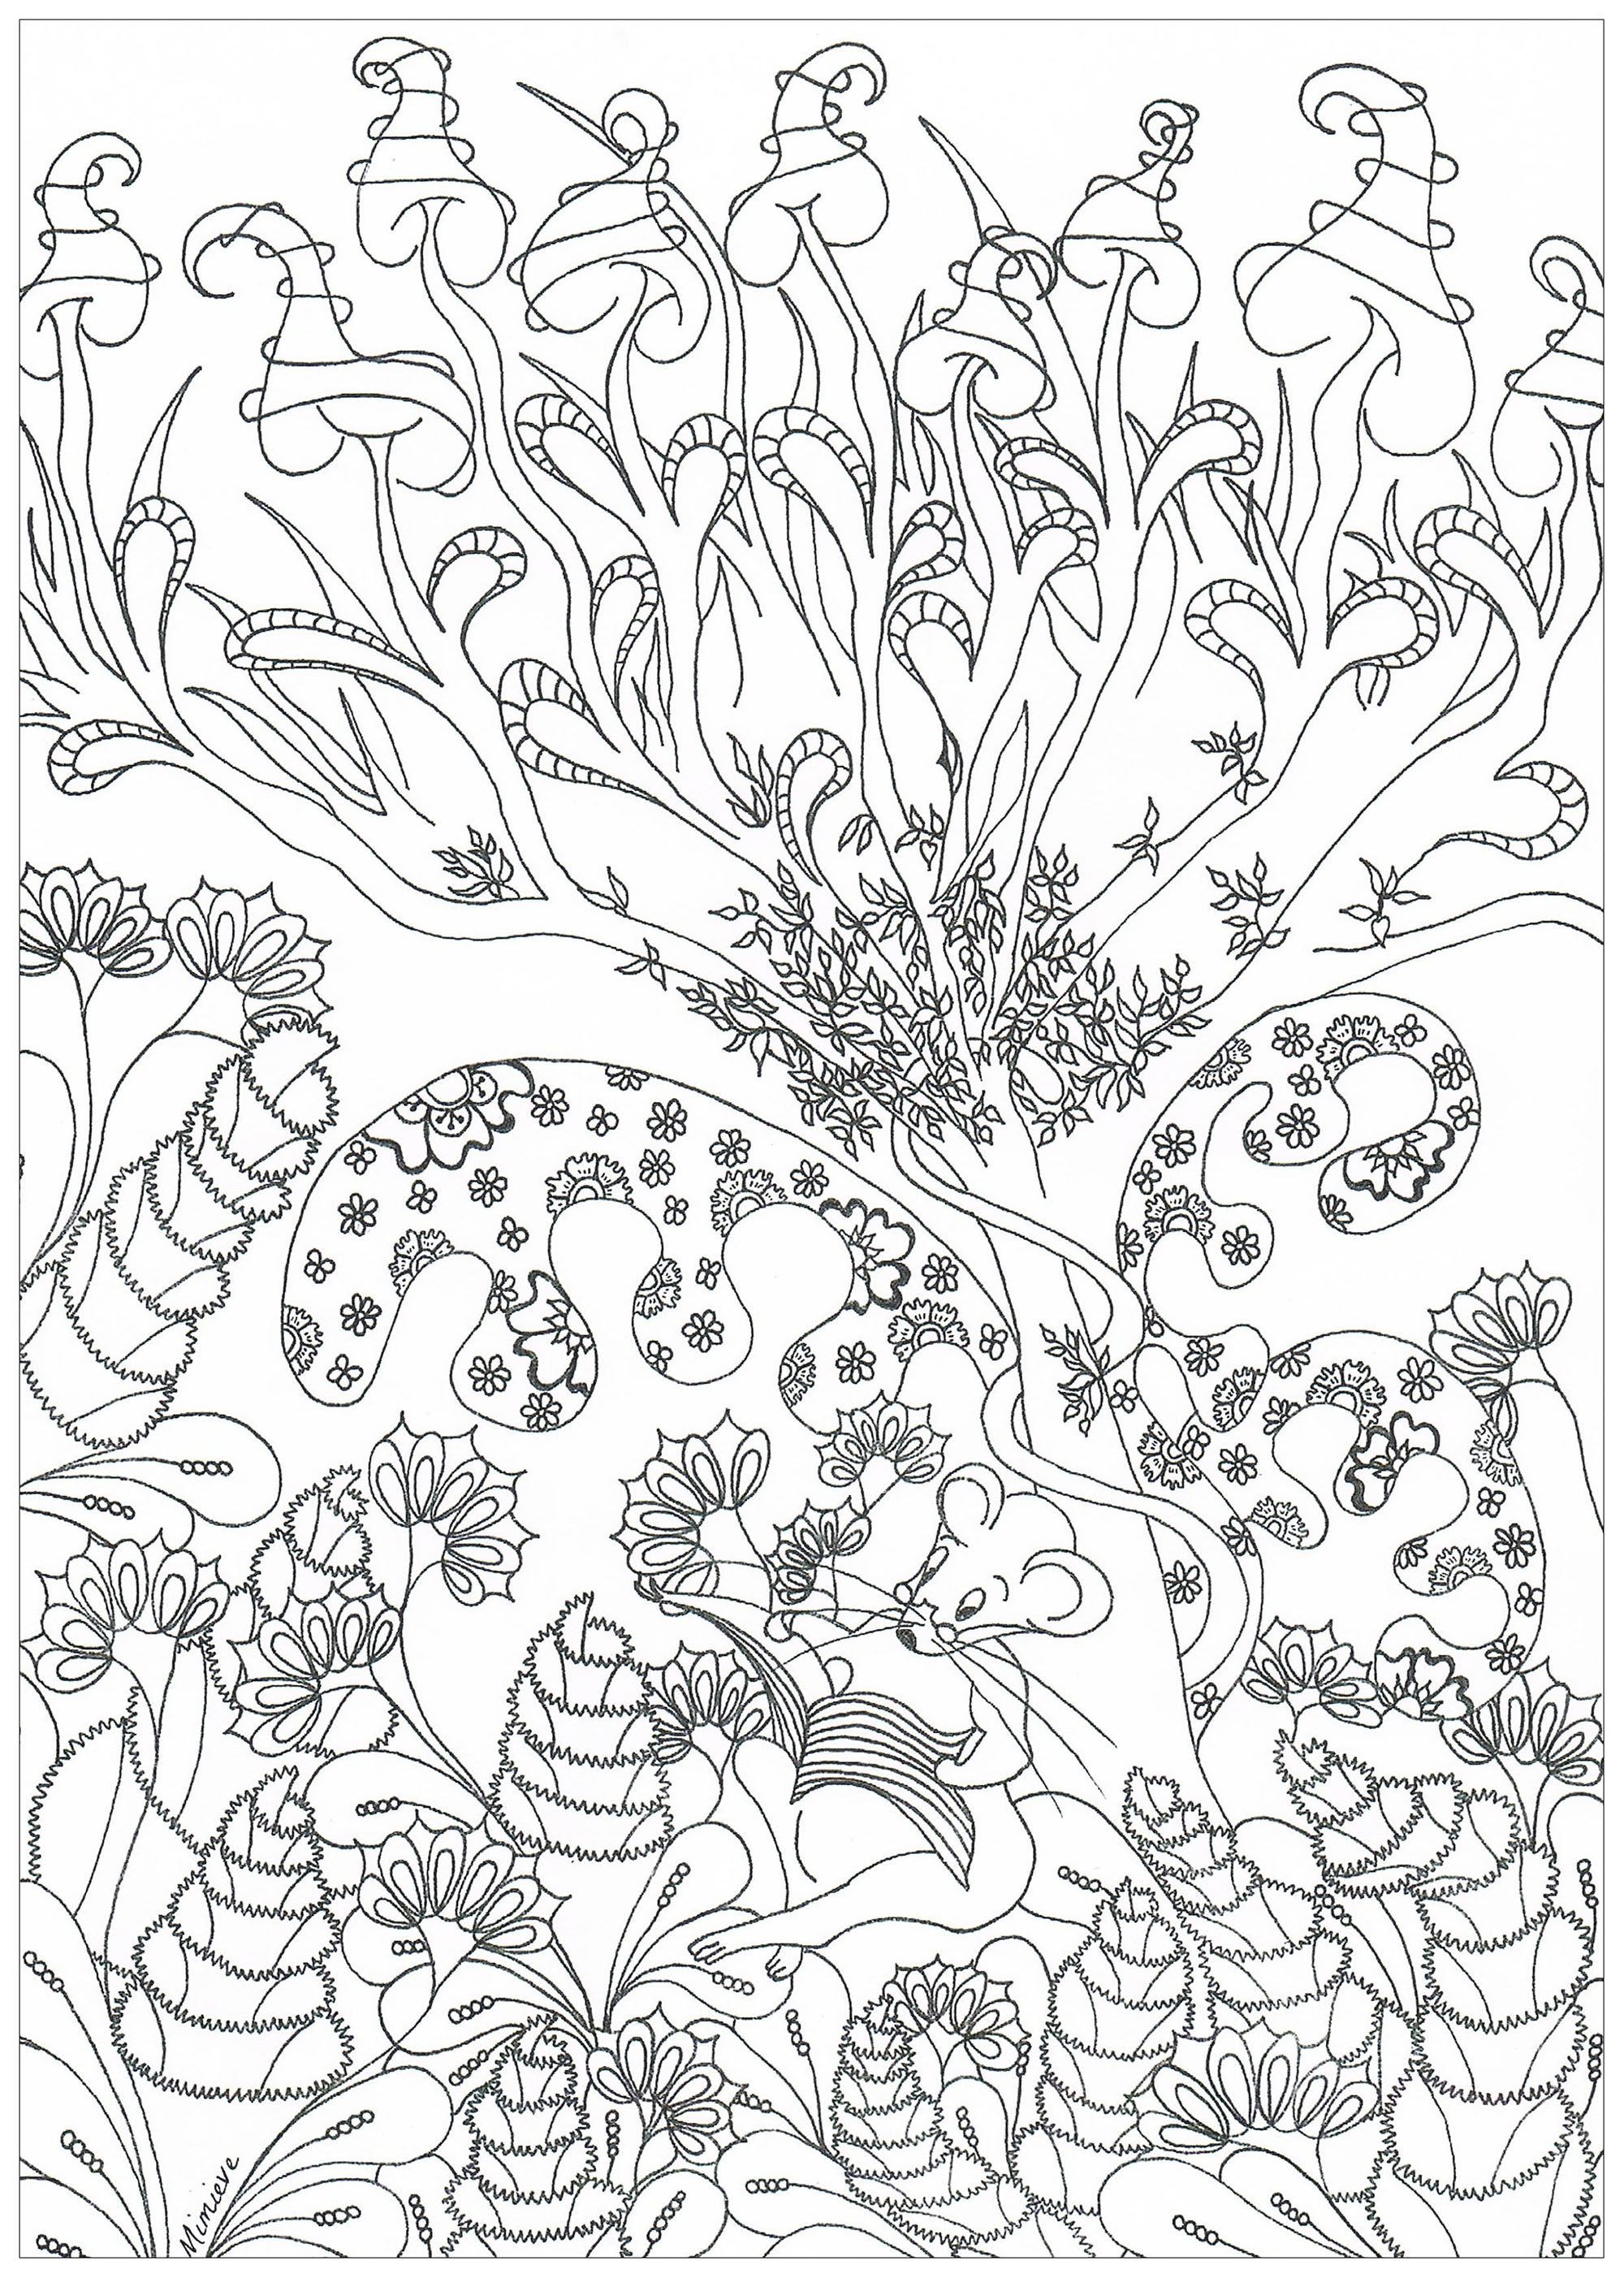 Printable Enchanted Forest Coloring Pages - Printable Word Searches